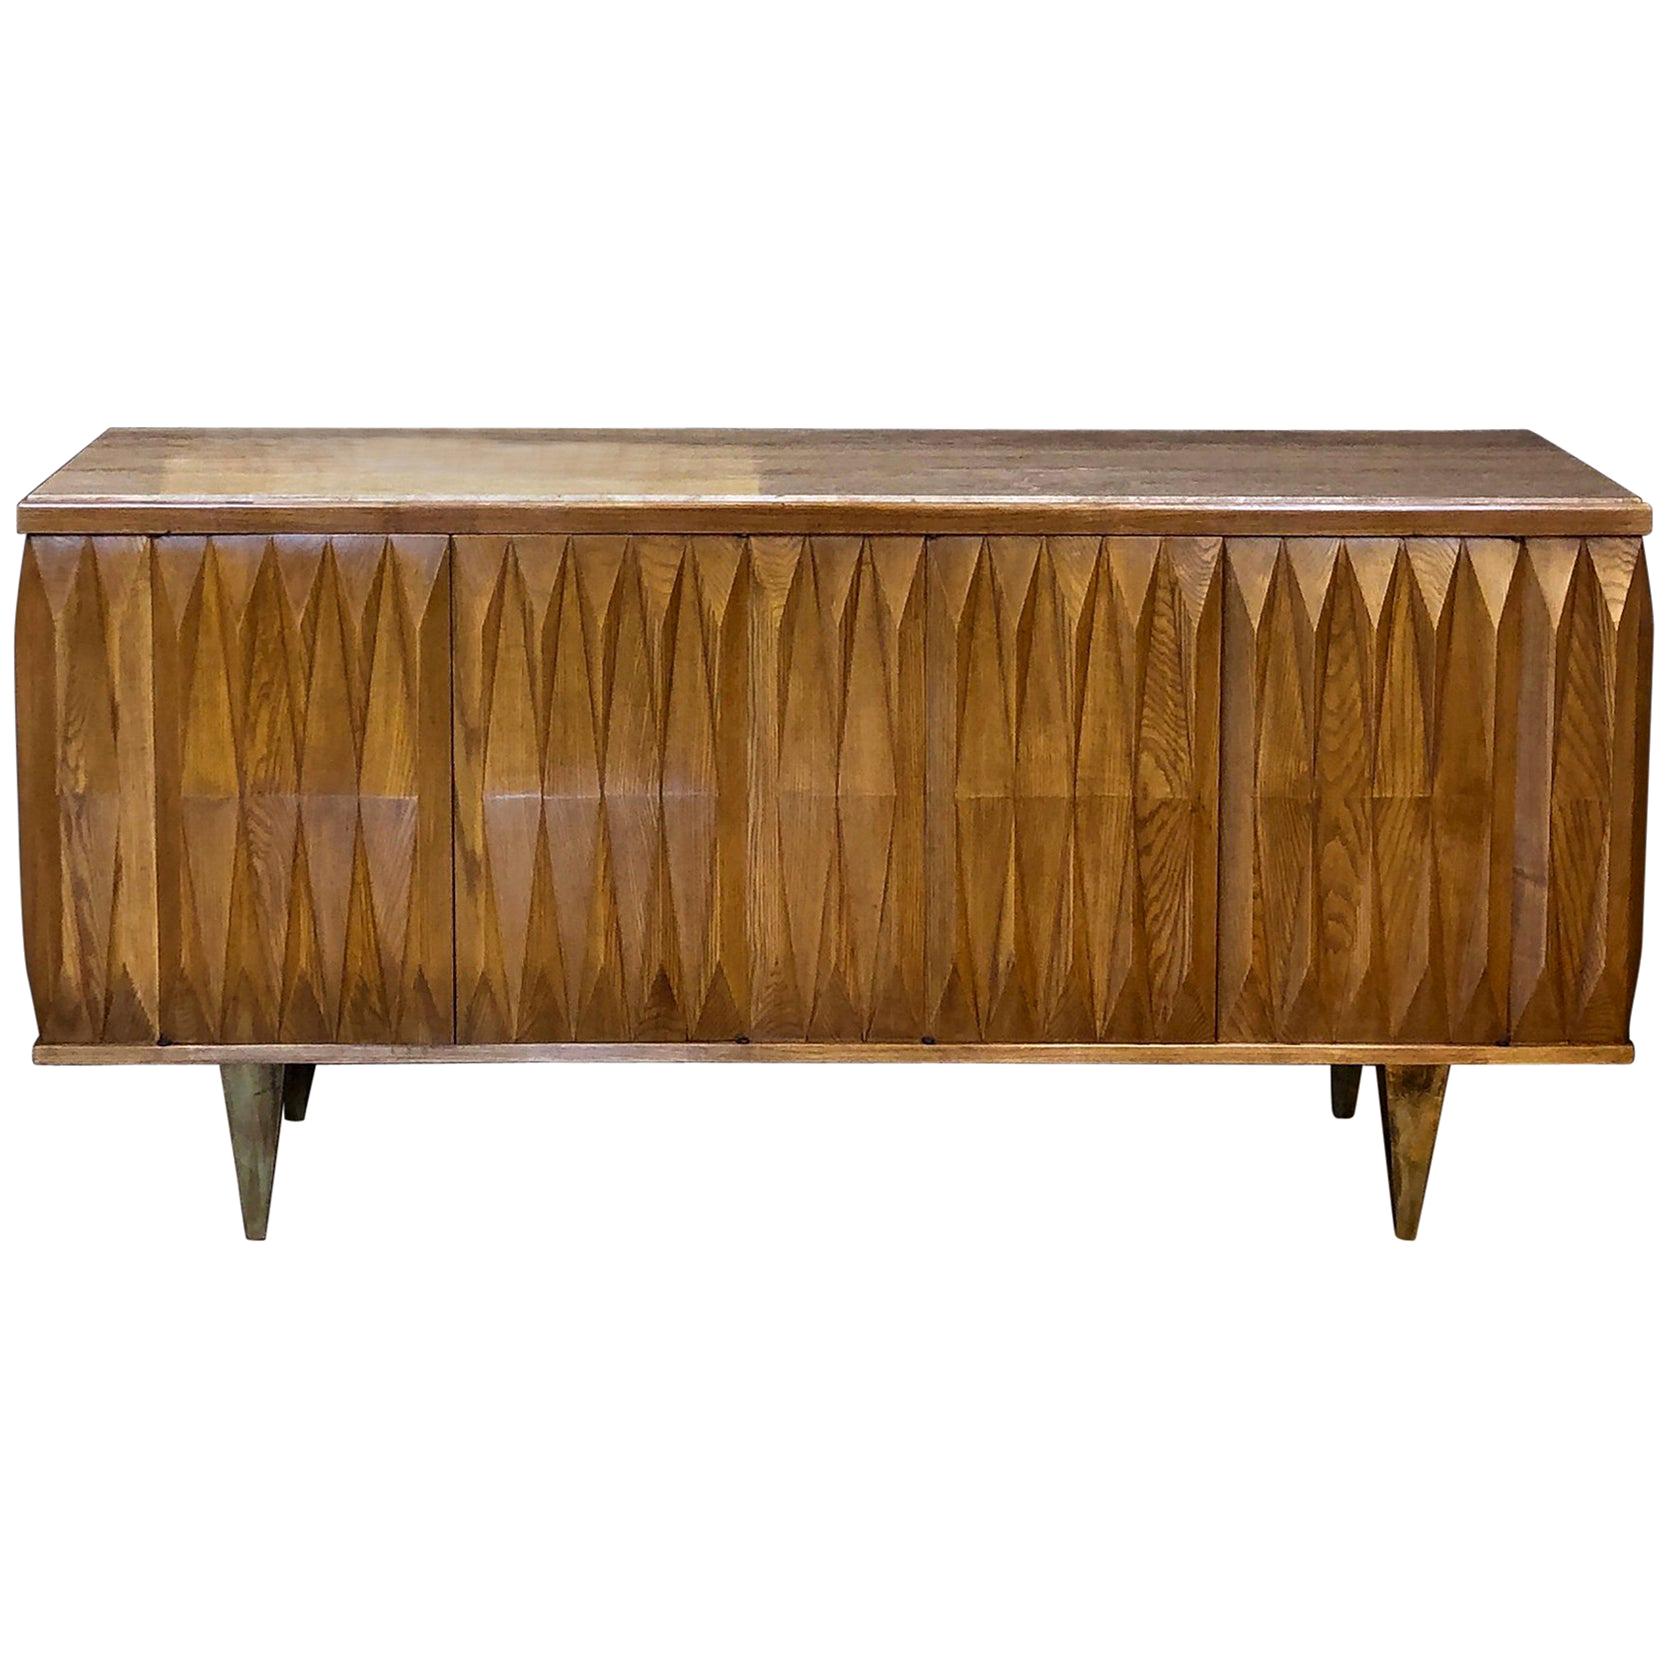 Late 20th Century Brutalist Oak Credenza with Travertine Top and Brass Feet